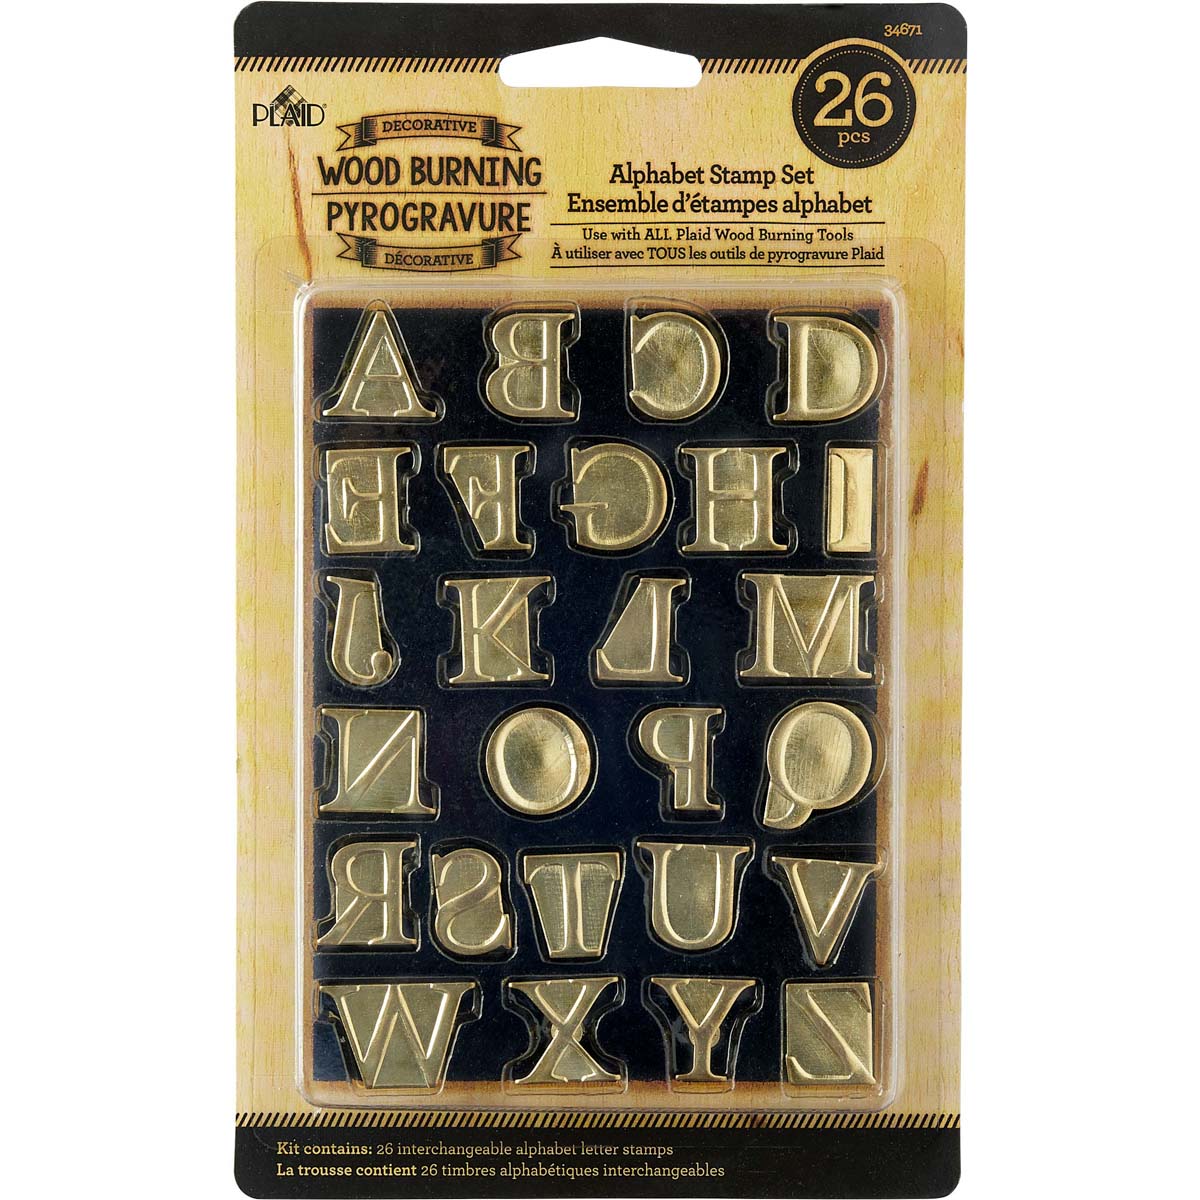 Creative steel letter stamps In An Assortment Of Designs 